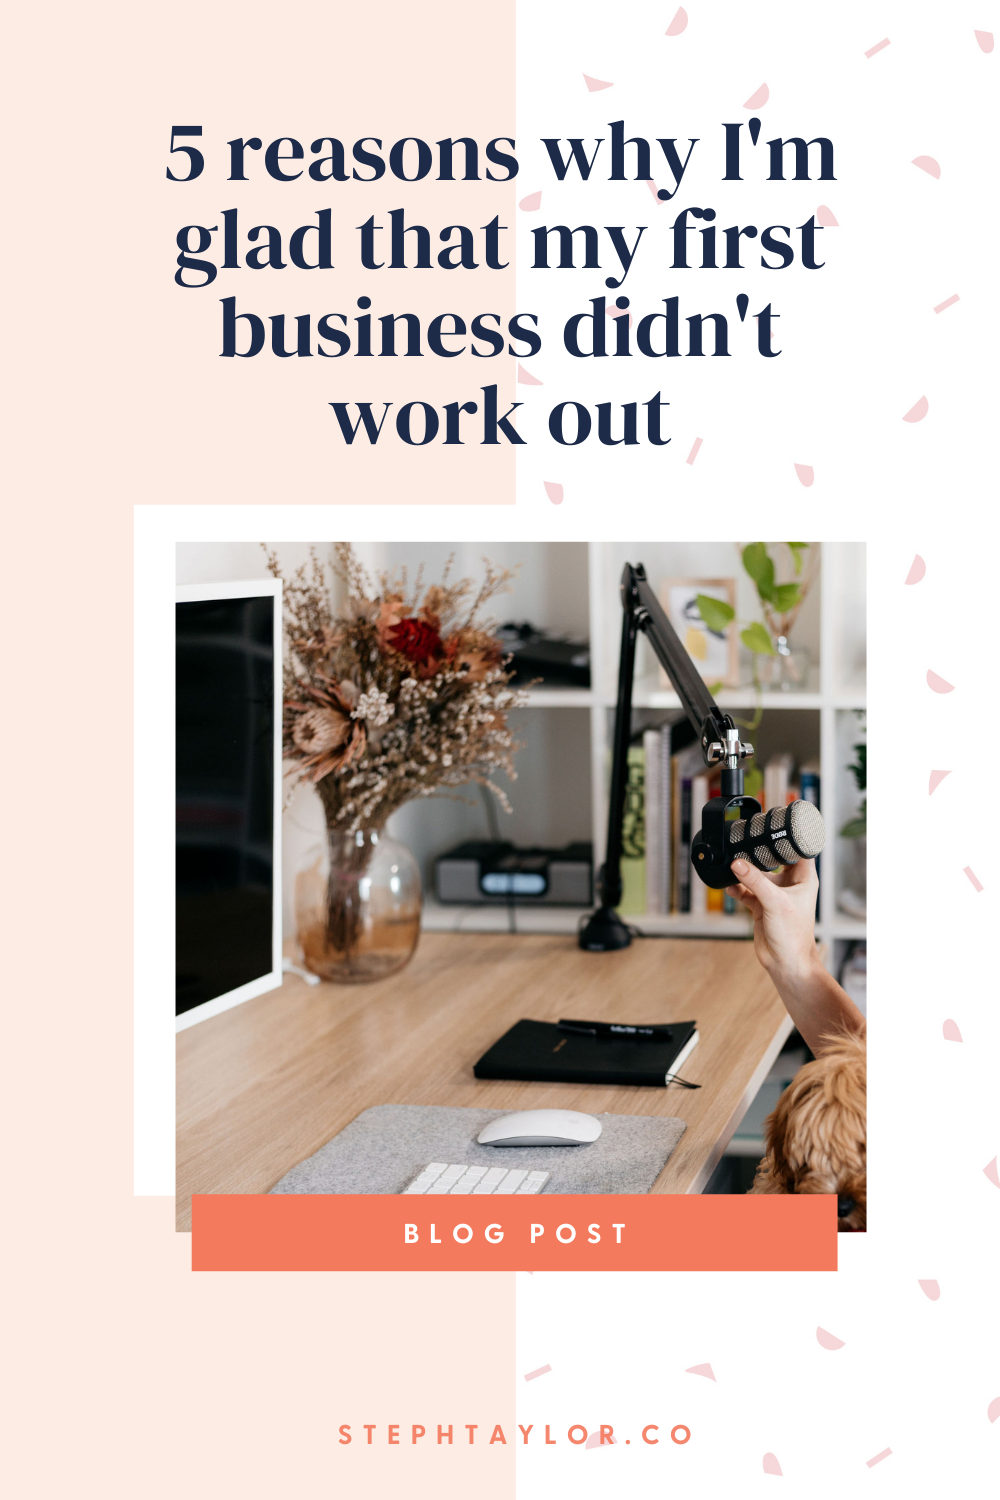 5 reasons why I'm glad that my first business didn't work out